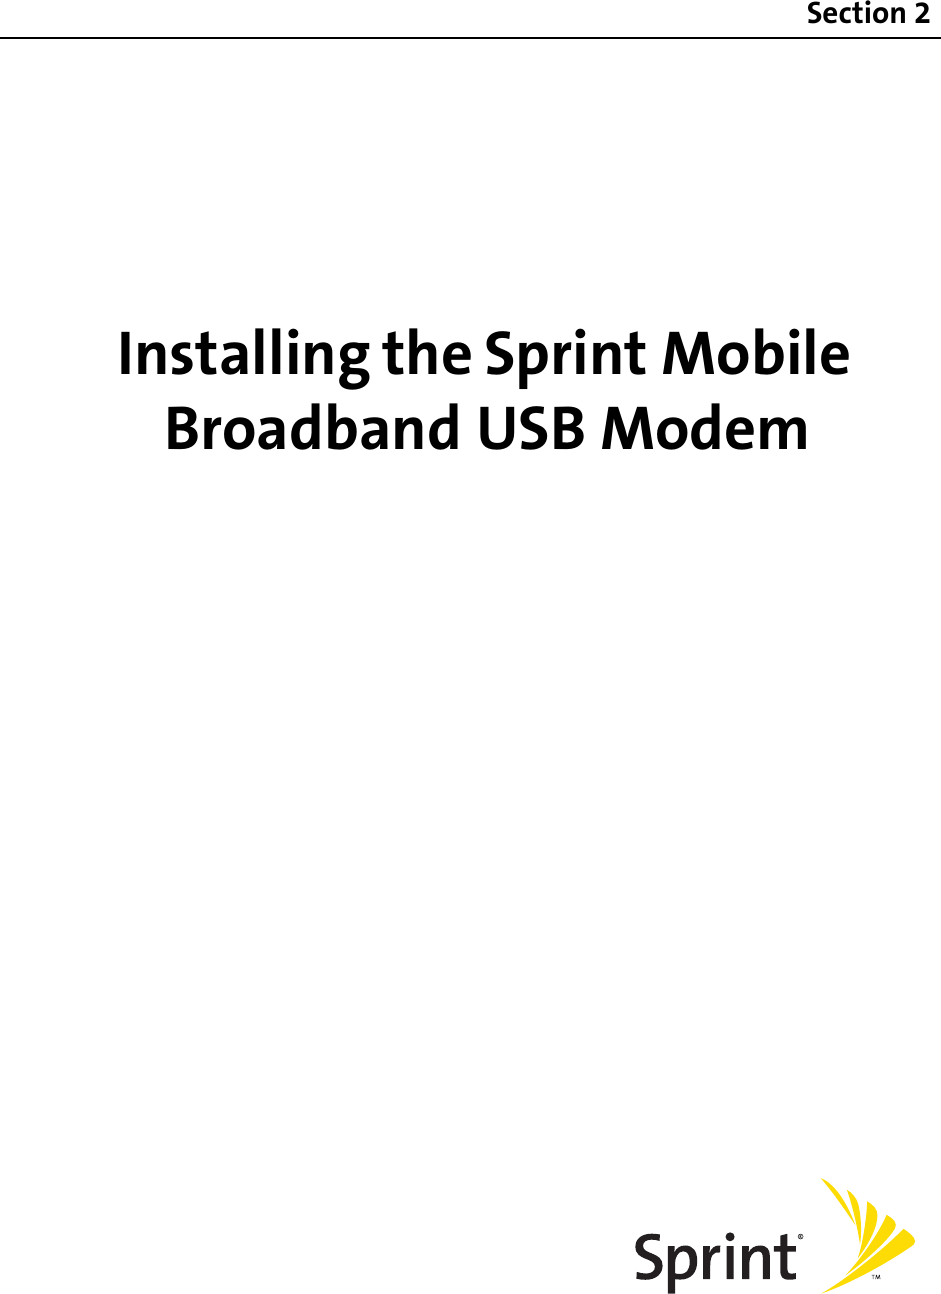 Installing the Sprint Mobile Broadband USB ModemSection 2